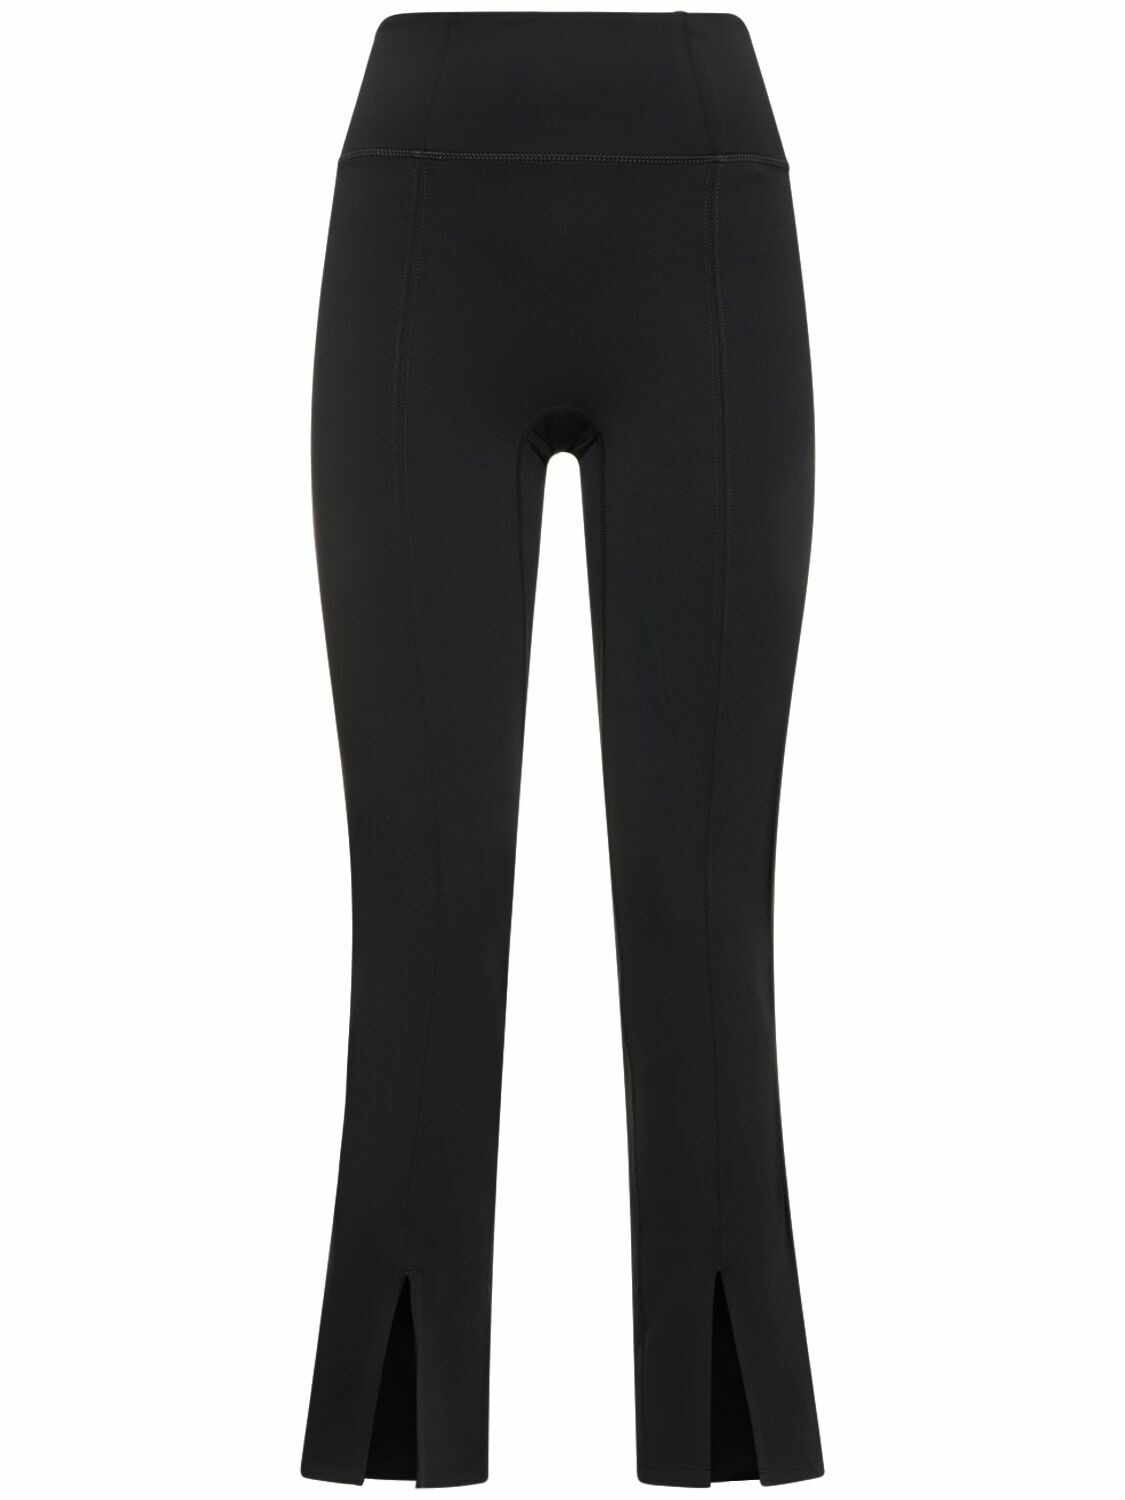 Girlfriend Collective Black High-Rise Compressive Legging Girlfriend  Collective